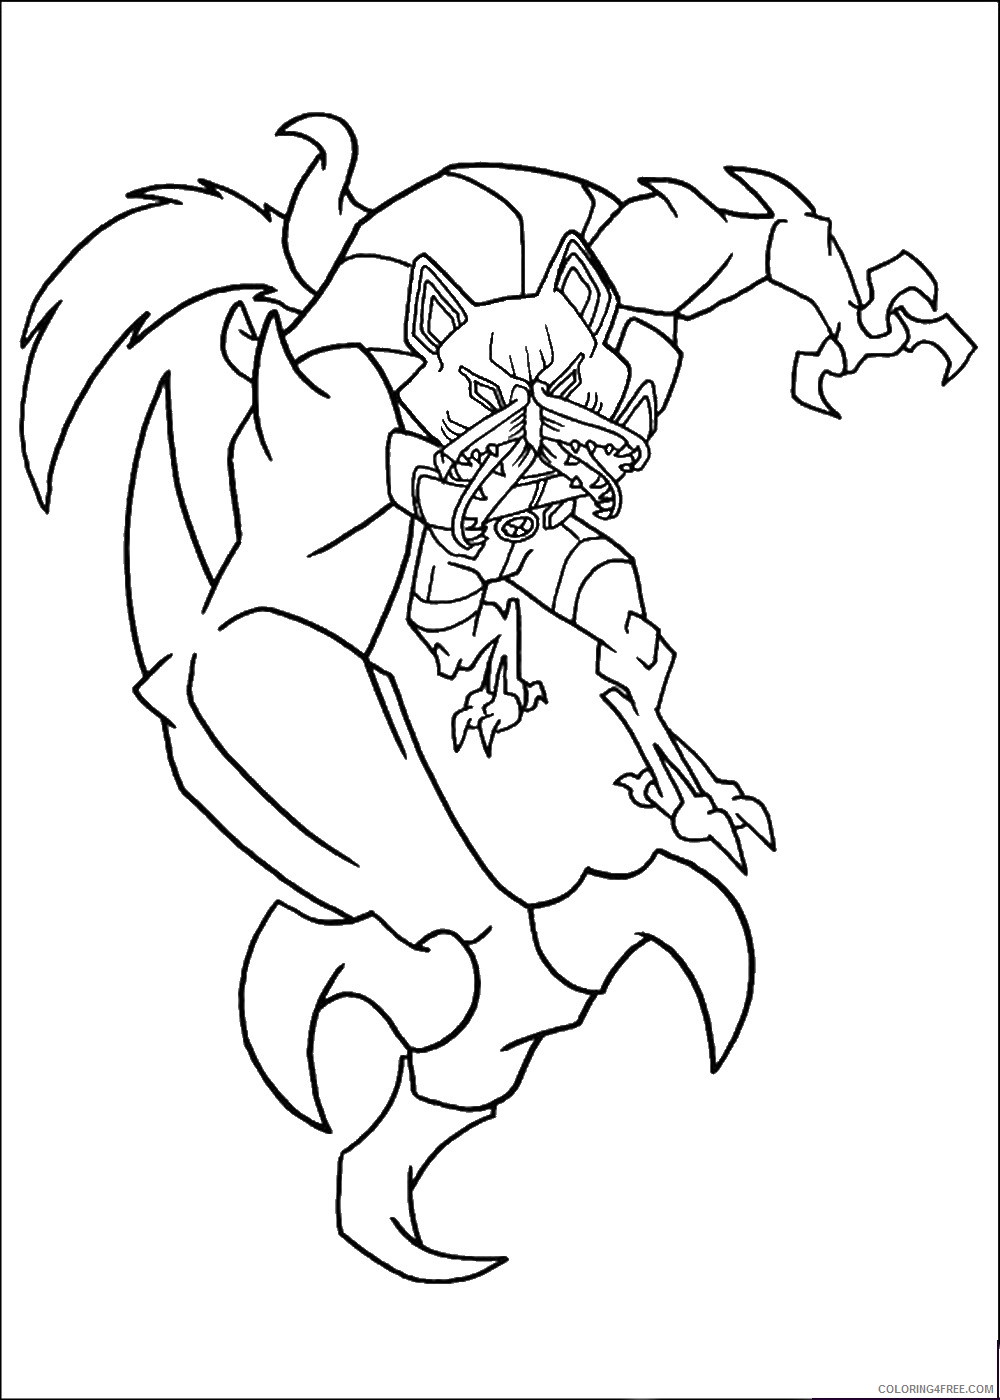 Ben 10 Coloring Pages Cartoons ben10 52 Printable 2020 1229 Coloring4free